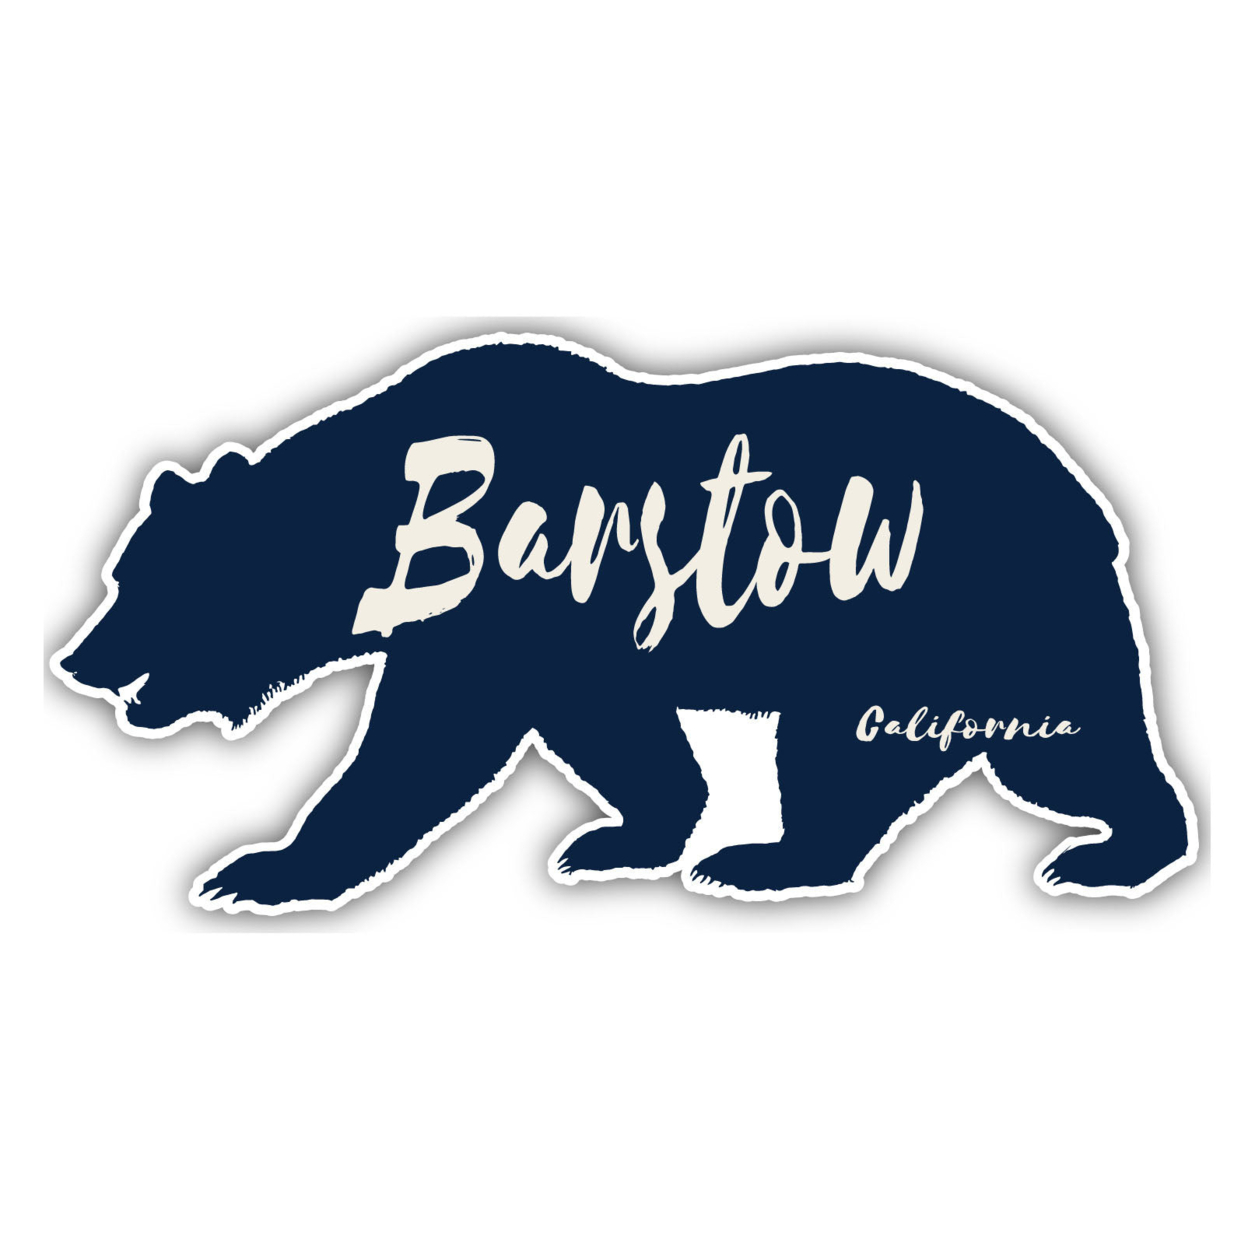 Barstow California Souvenir Decorative Stickers (Choose Theme And Size) - Single Unit, 10-Inch, Bear